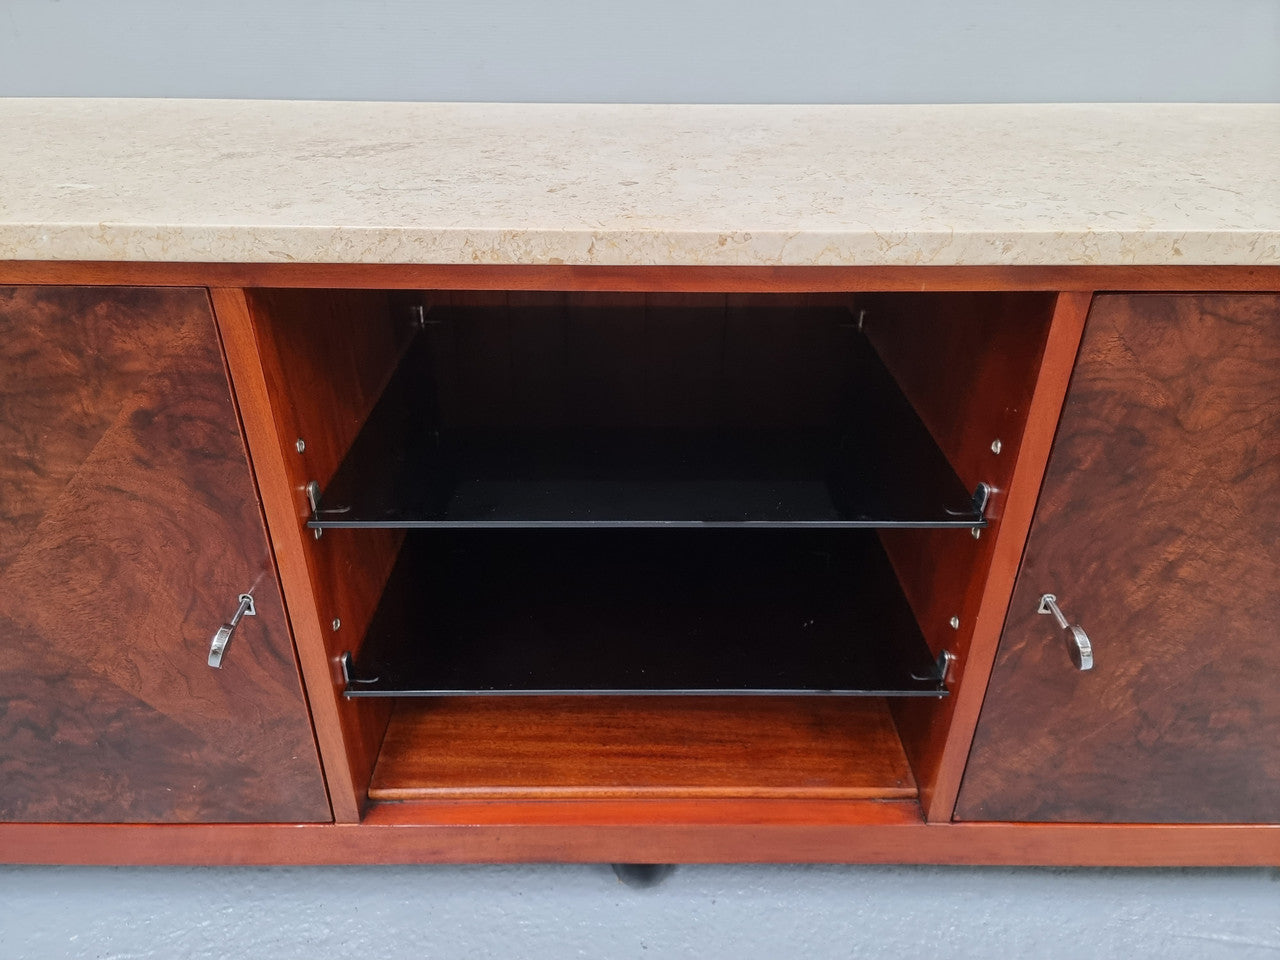 Beautiful Bespoke Art Deco style walnut and mahogany low line cabinet with a marble top and plenty of storage. It has two doors with a shelf each side and in the middle in has two glass shelves. Would make an ideal TV cabinet and has a hole in the back to run cords through. In very good original detailed condition.